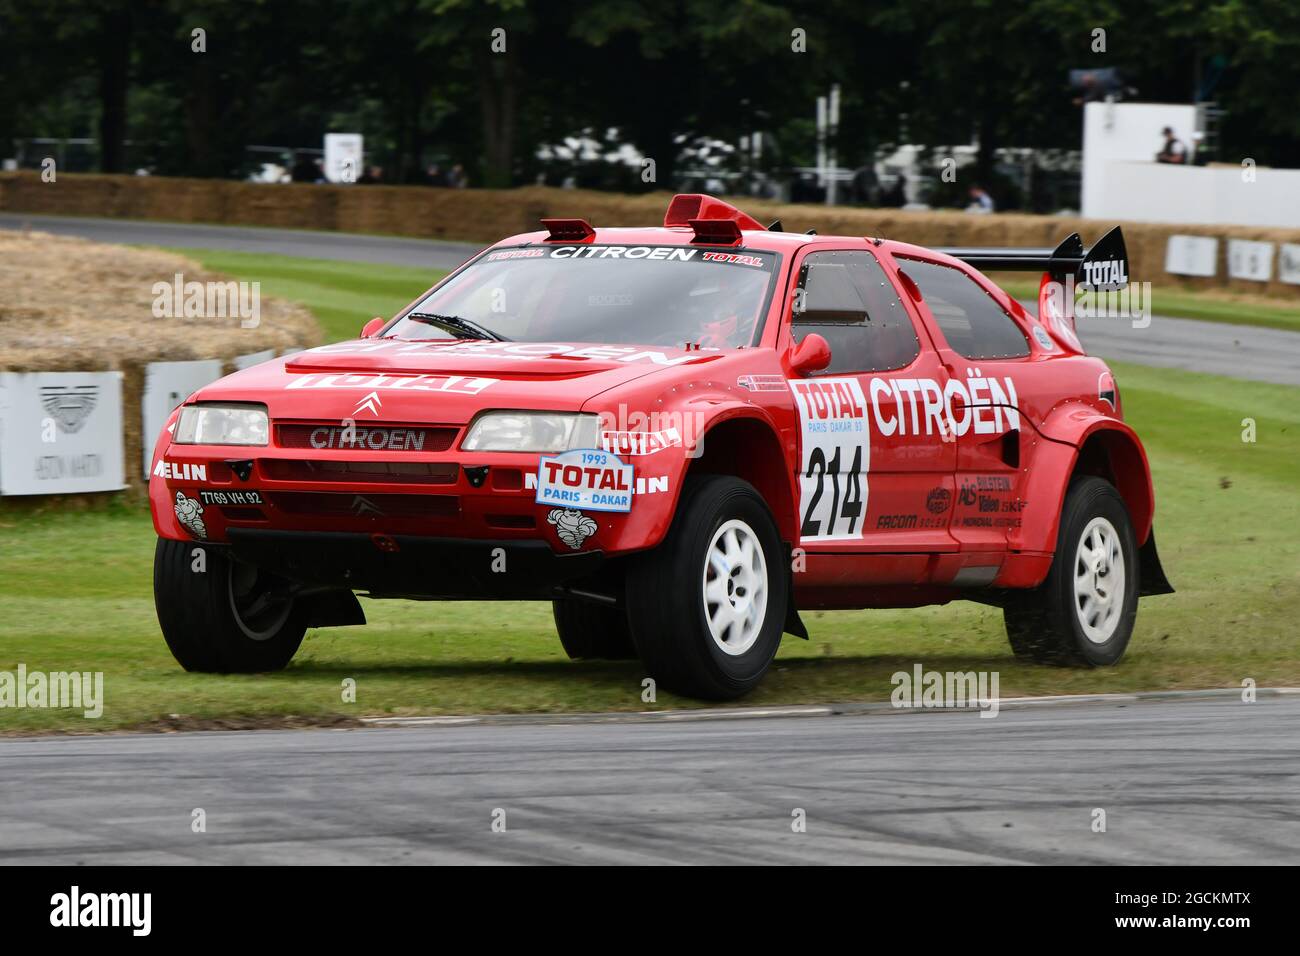 A little bit of off-roading, Max Girado, Marcus Willis, Citroen ZX Rallye Raid, Ultimate rally cars, The Maestros - Motorsport's Great All-Rounders, G Stock Photo